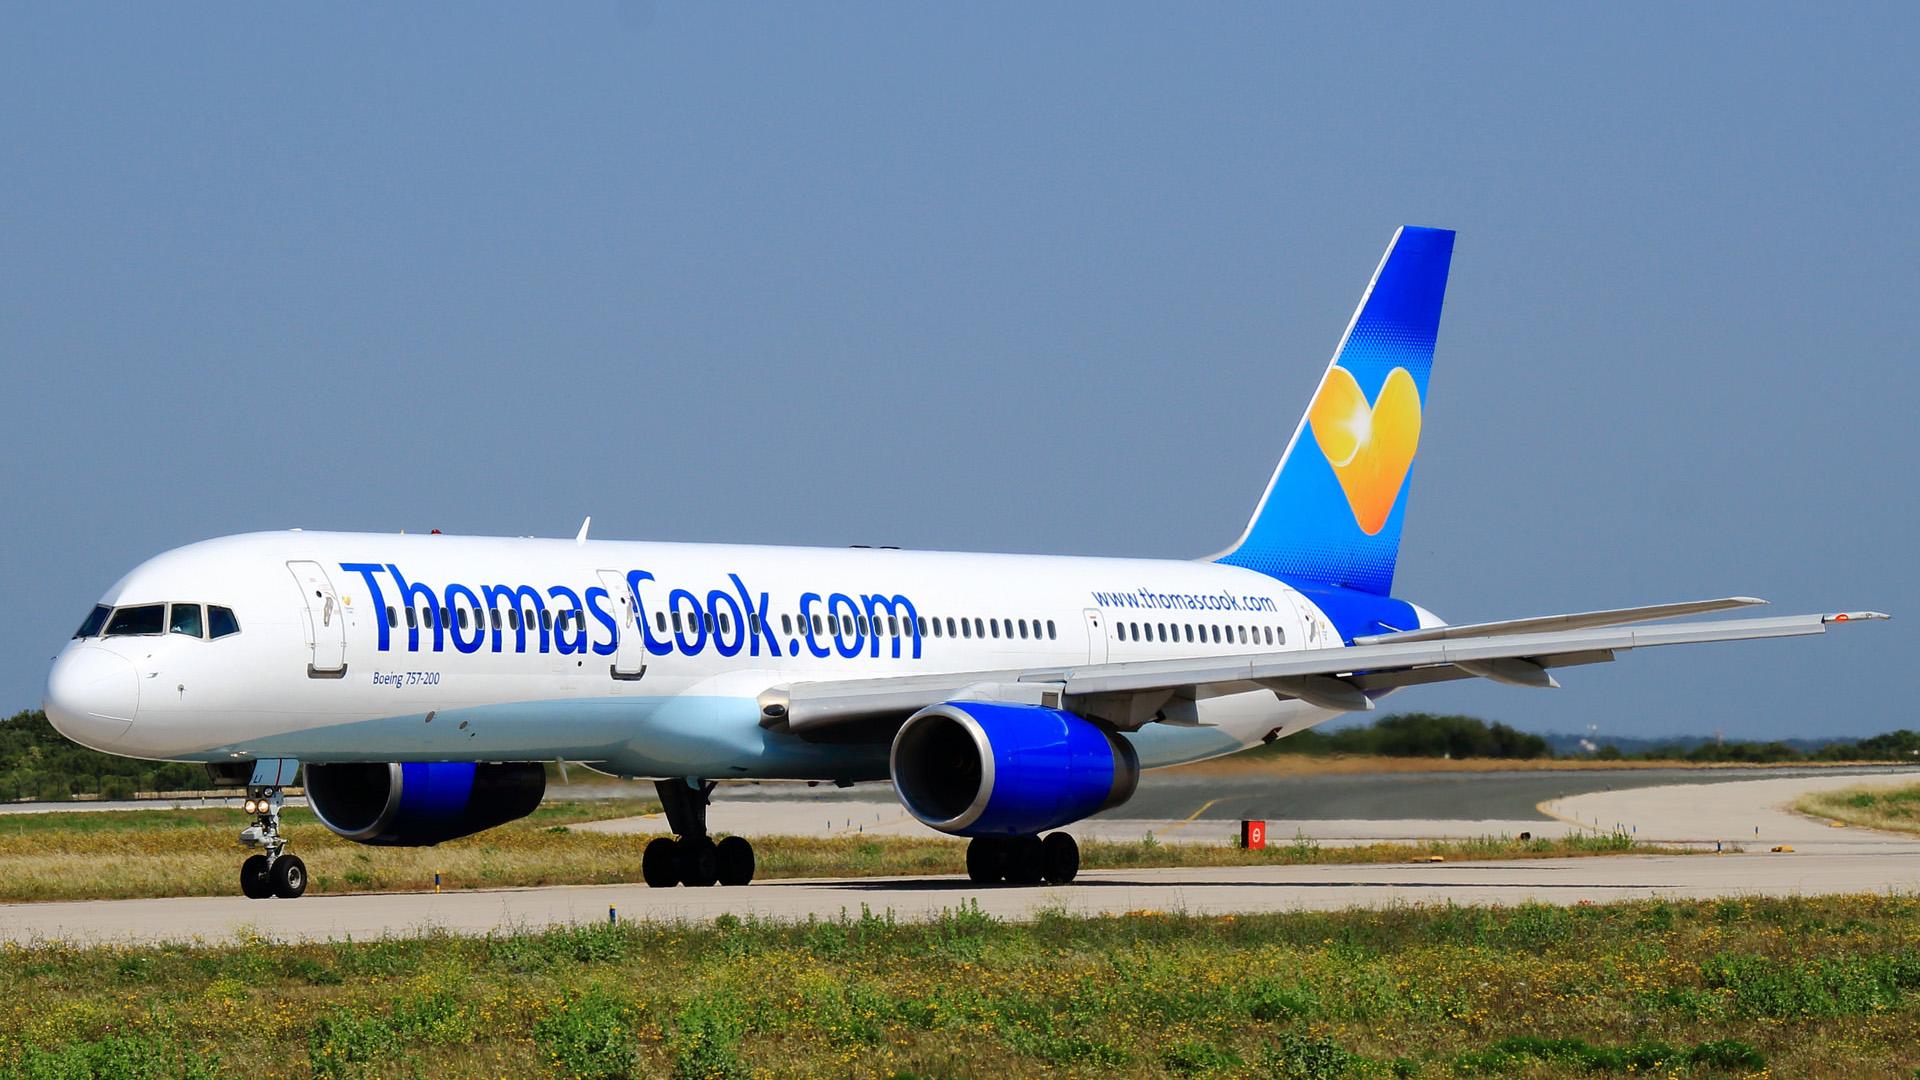 Thomas Cook Airlines to retire its last Boeing 757 in 2019